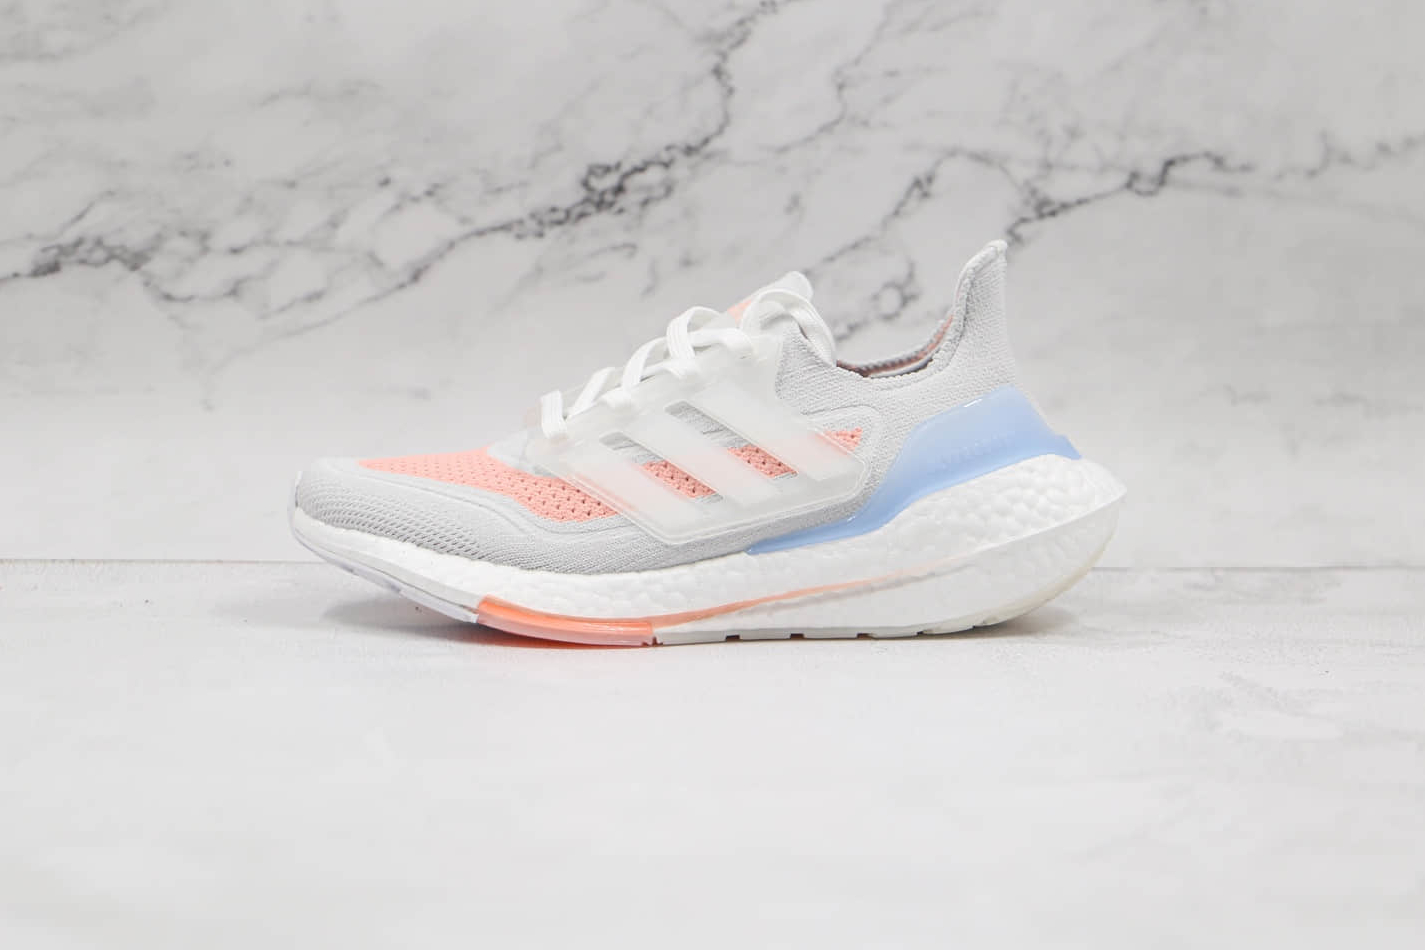 Adidas UltraBoost 21 'White Glow Pink' FY0396 - Latest Release at Great Prices